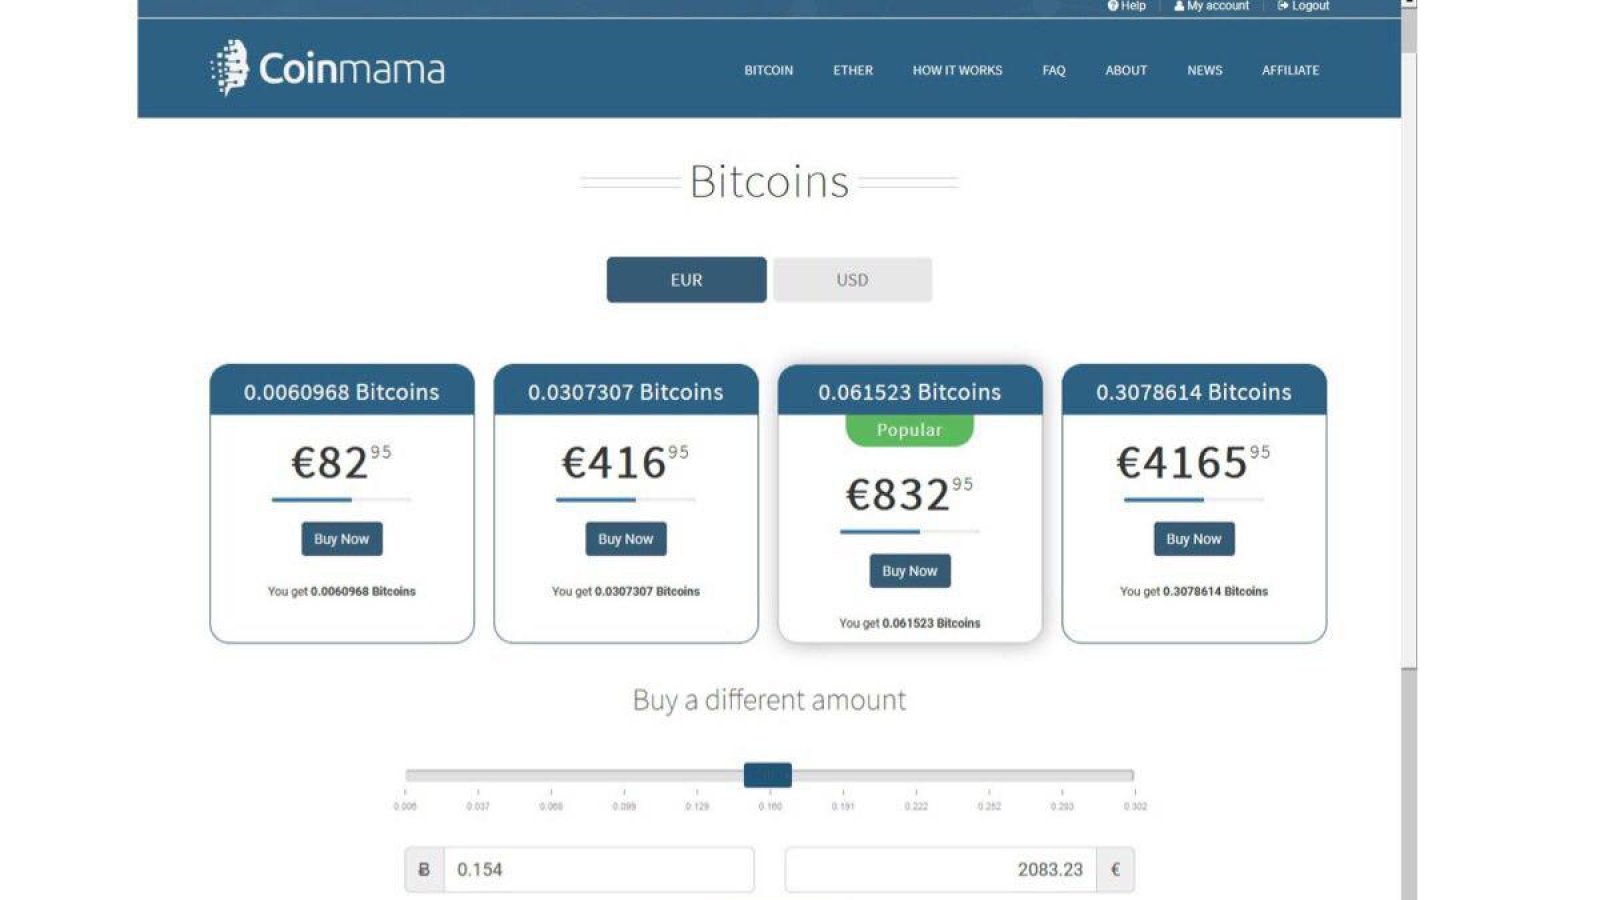 Coinmama offers